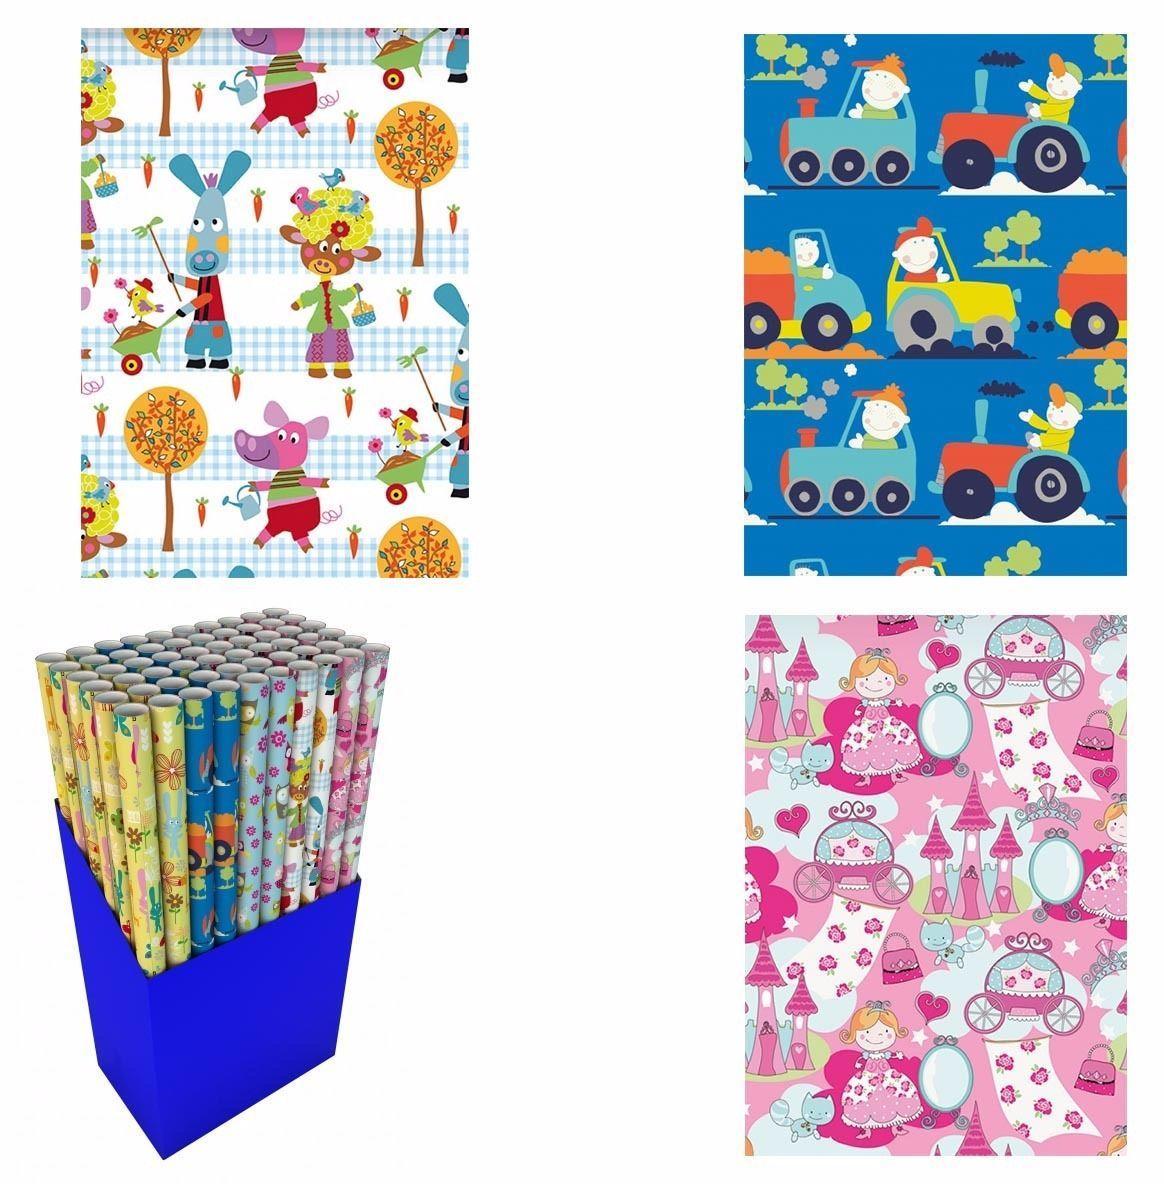 1 Roll 3m x 70cm CARS GIFT WRAP ROLL -Birthdays, Parties, Christmas Presents  9846 (Parcel Rate)